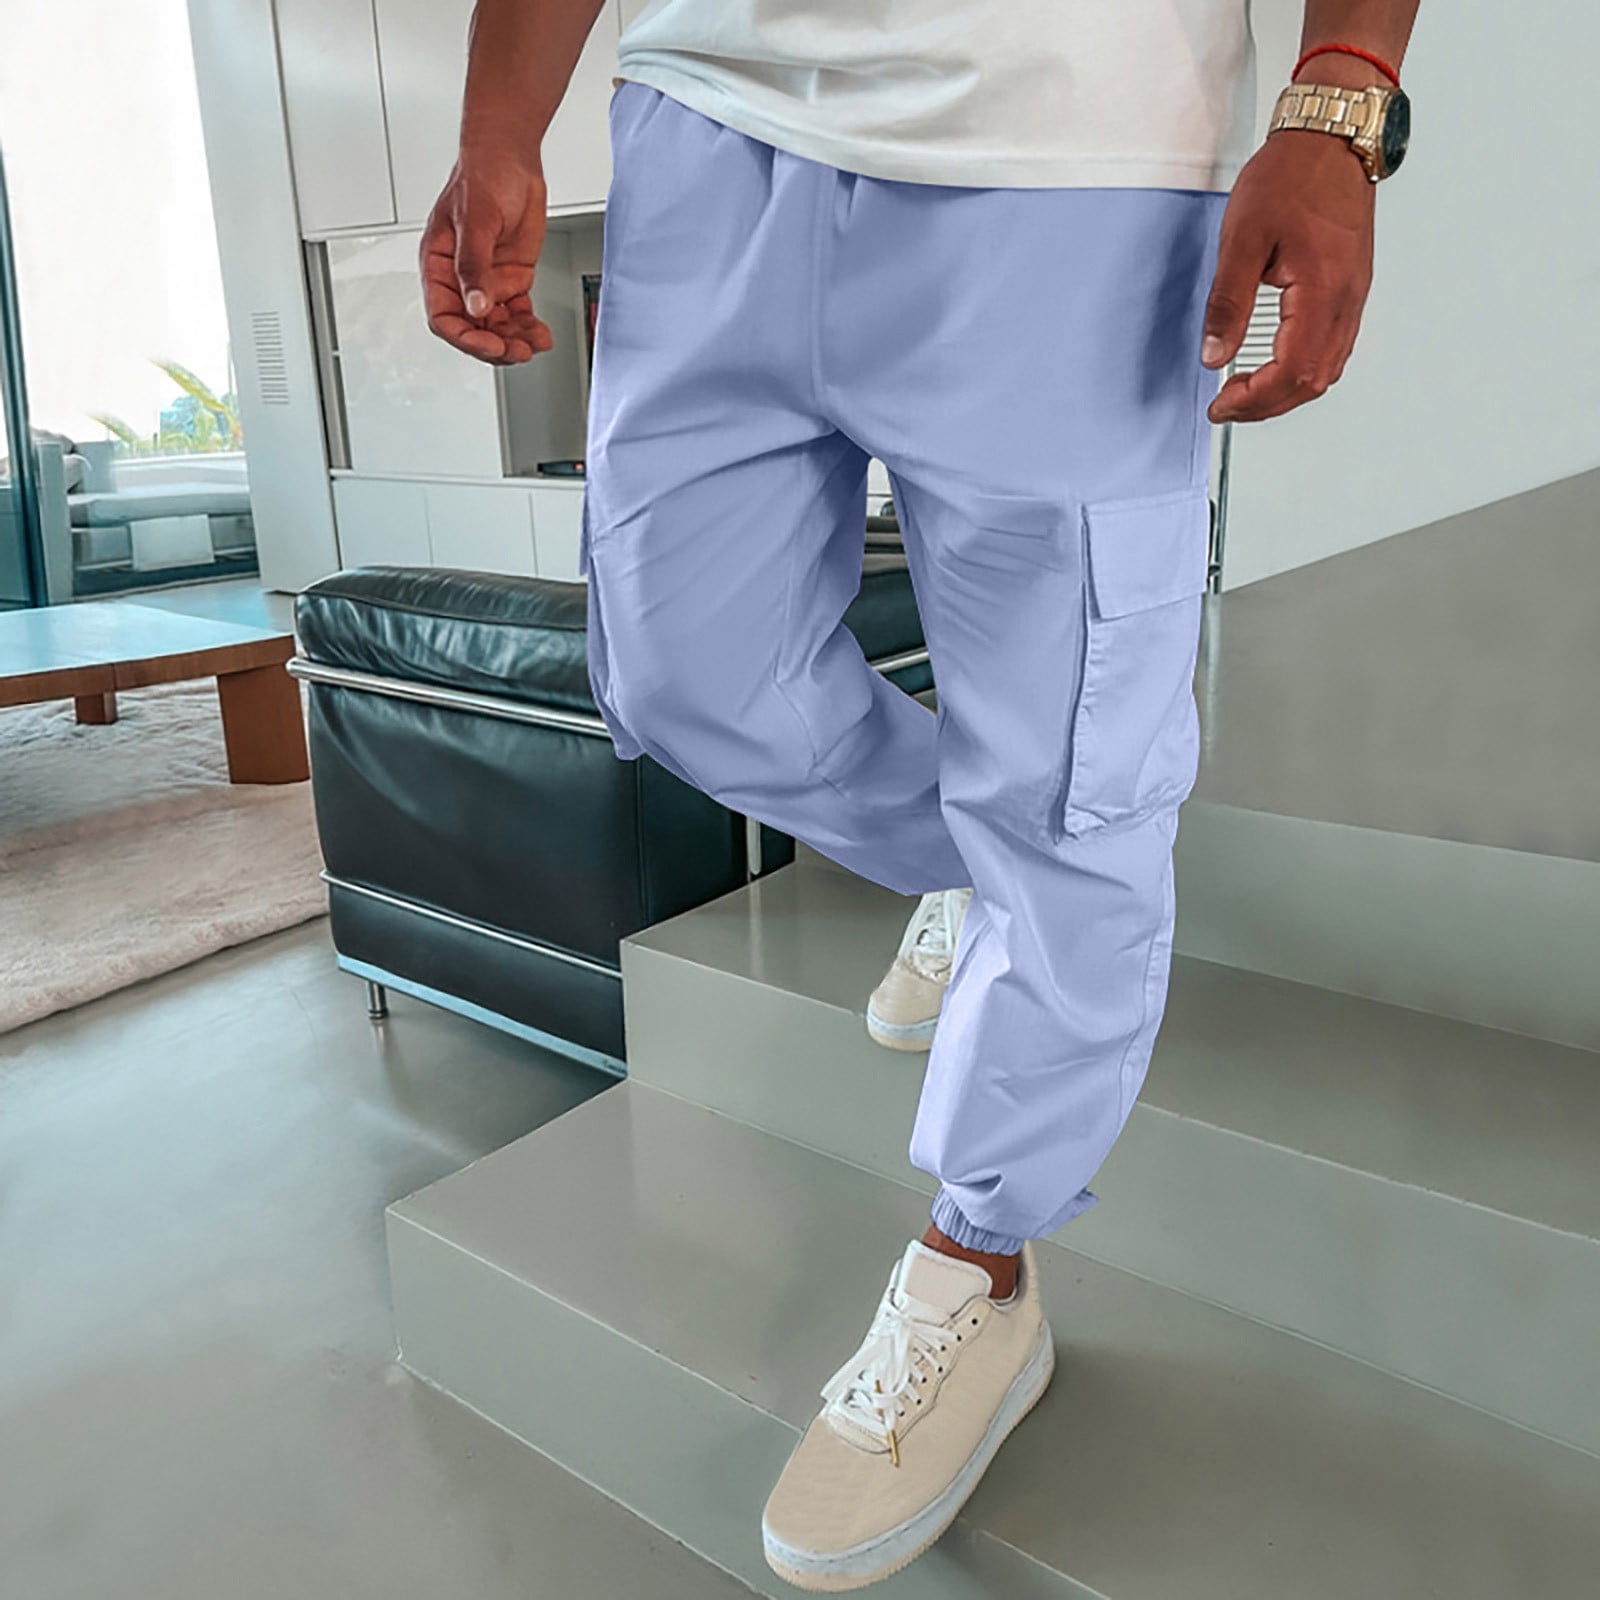 JNGSA Mens Cargo Joggers Sweatpant- Cotton Drawstring Cuffed Pants  Sweatpants Trousers with Pocket Athletic Pants for Workout Light Blue XL  Clearance 